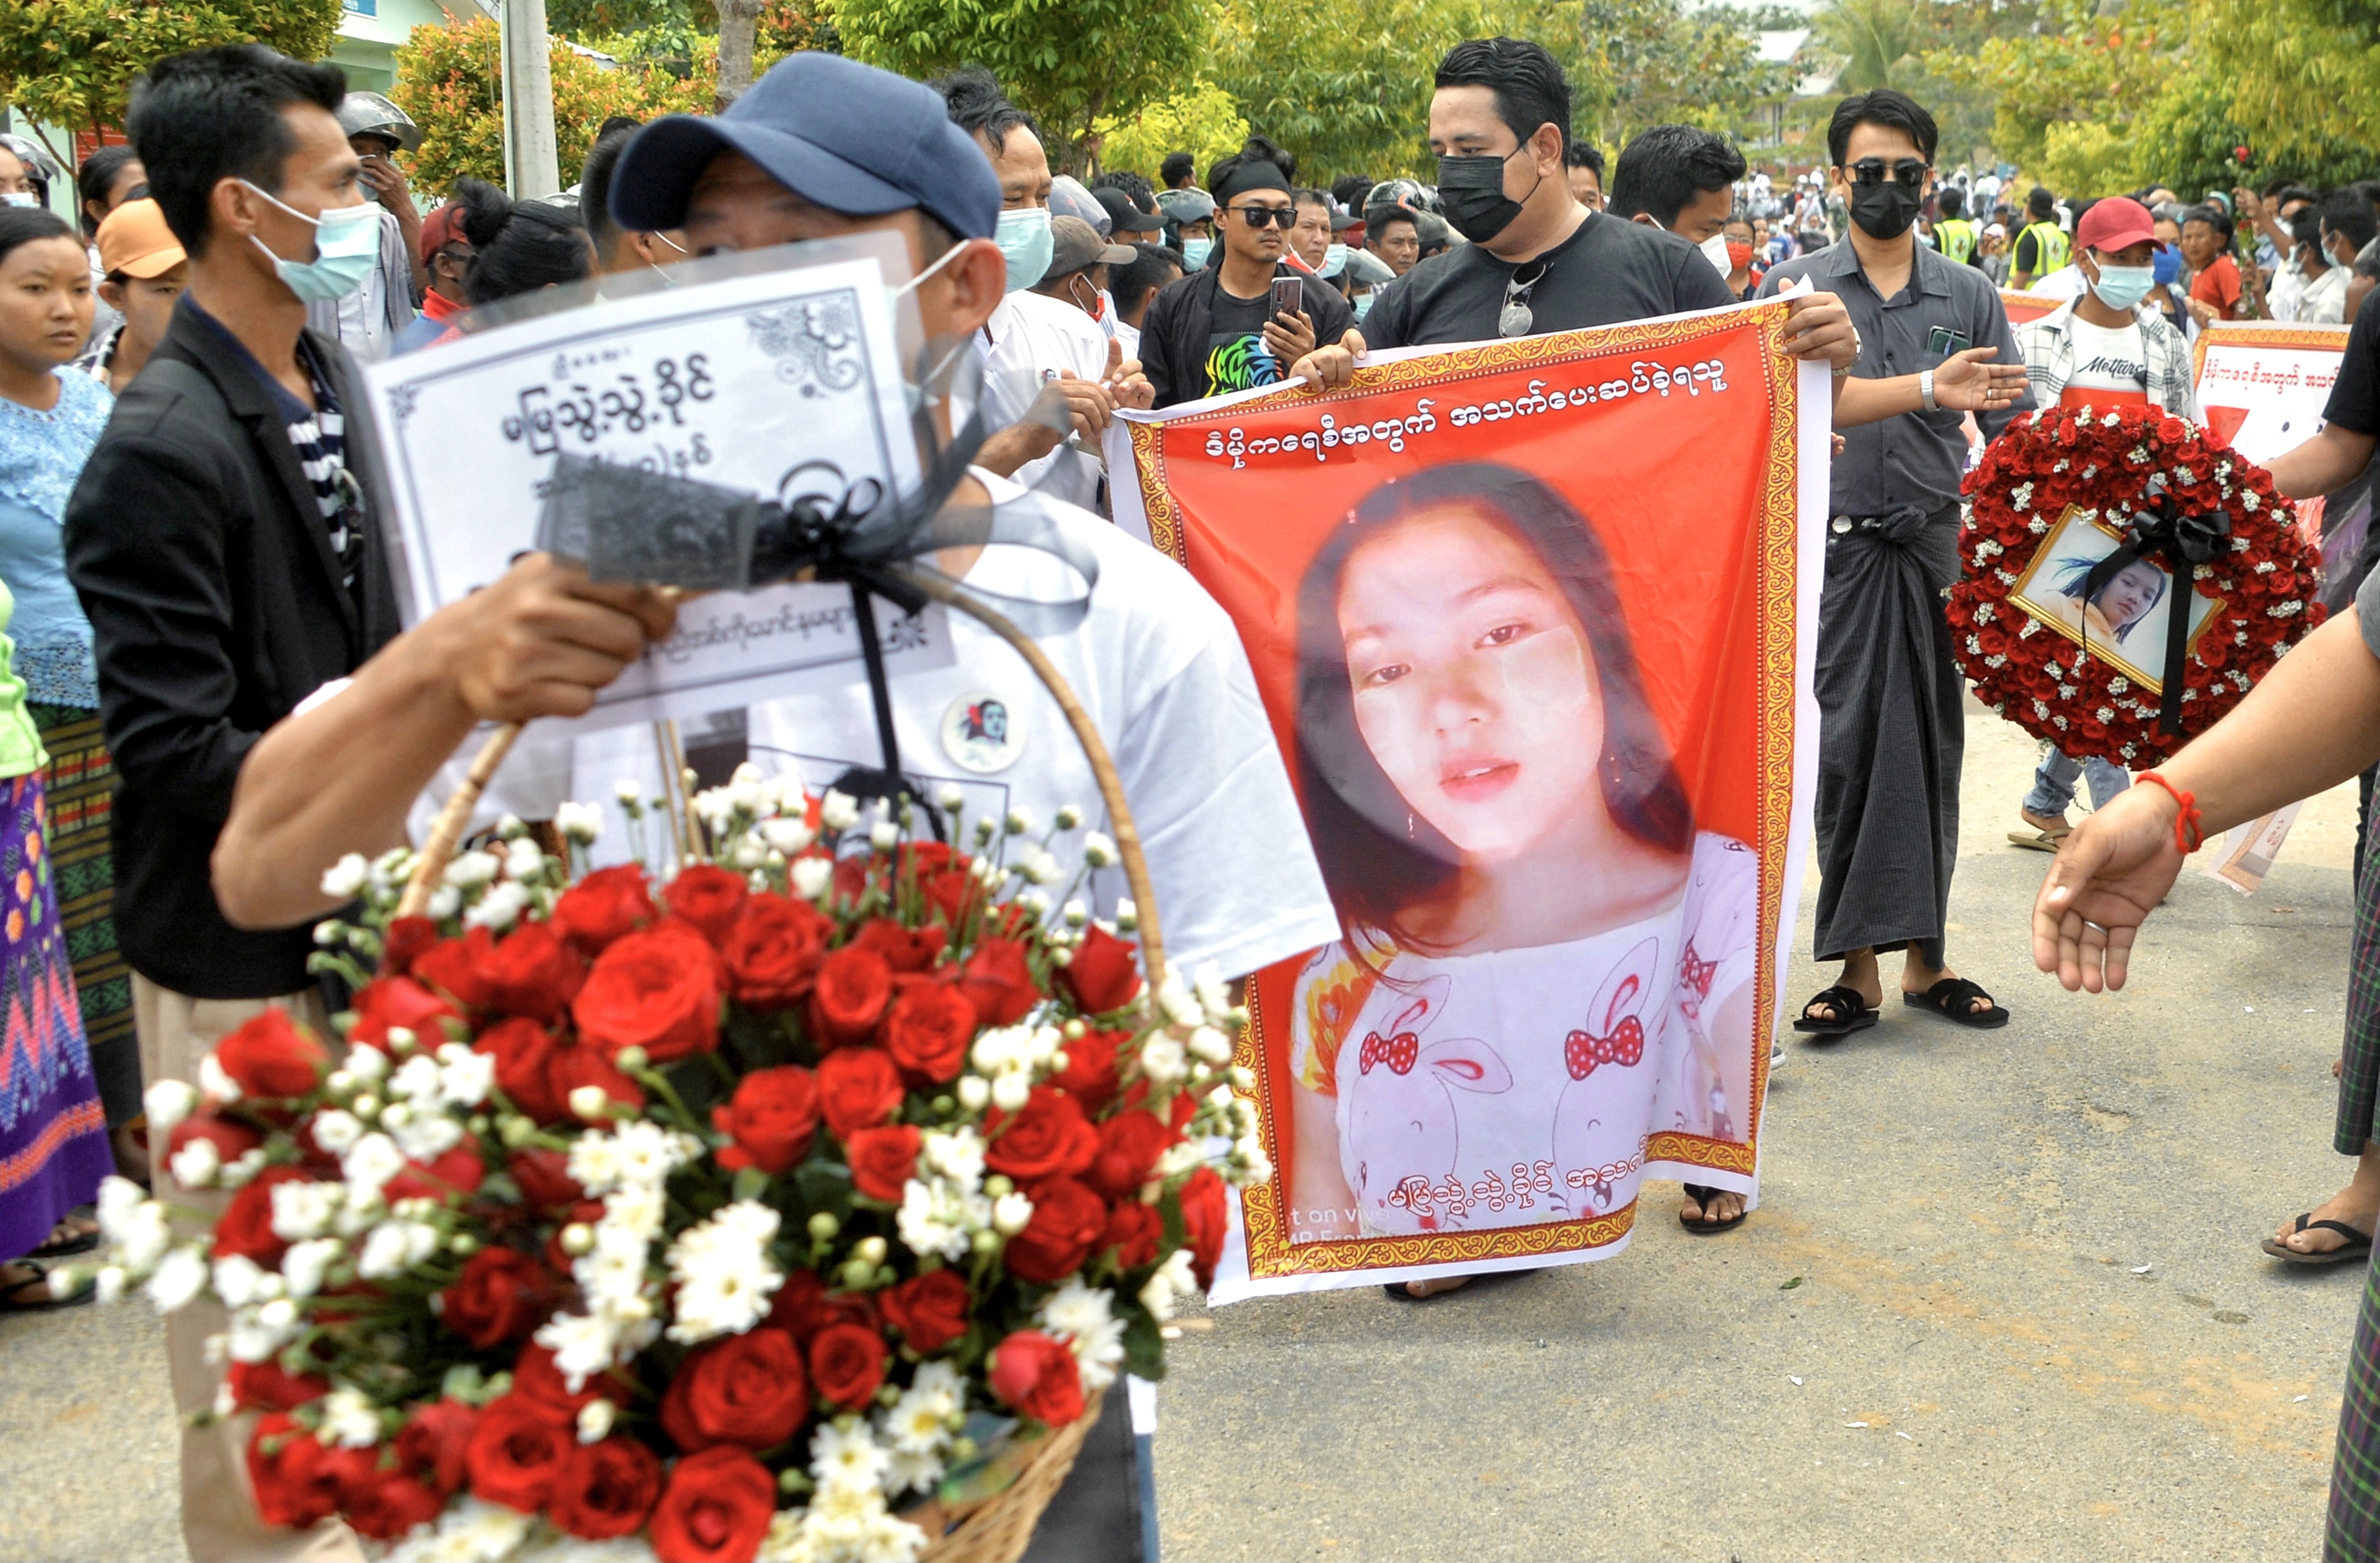 myanmar anti-coup protesters mourn woman shot and killed in rally 